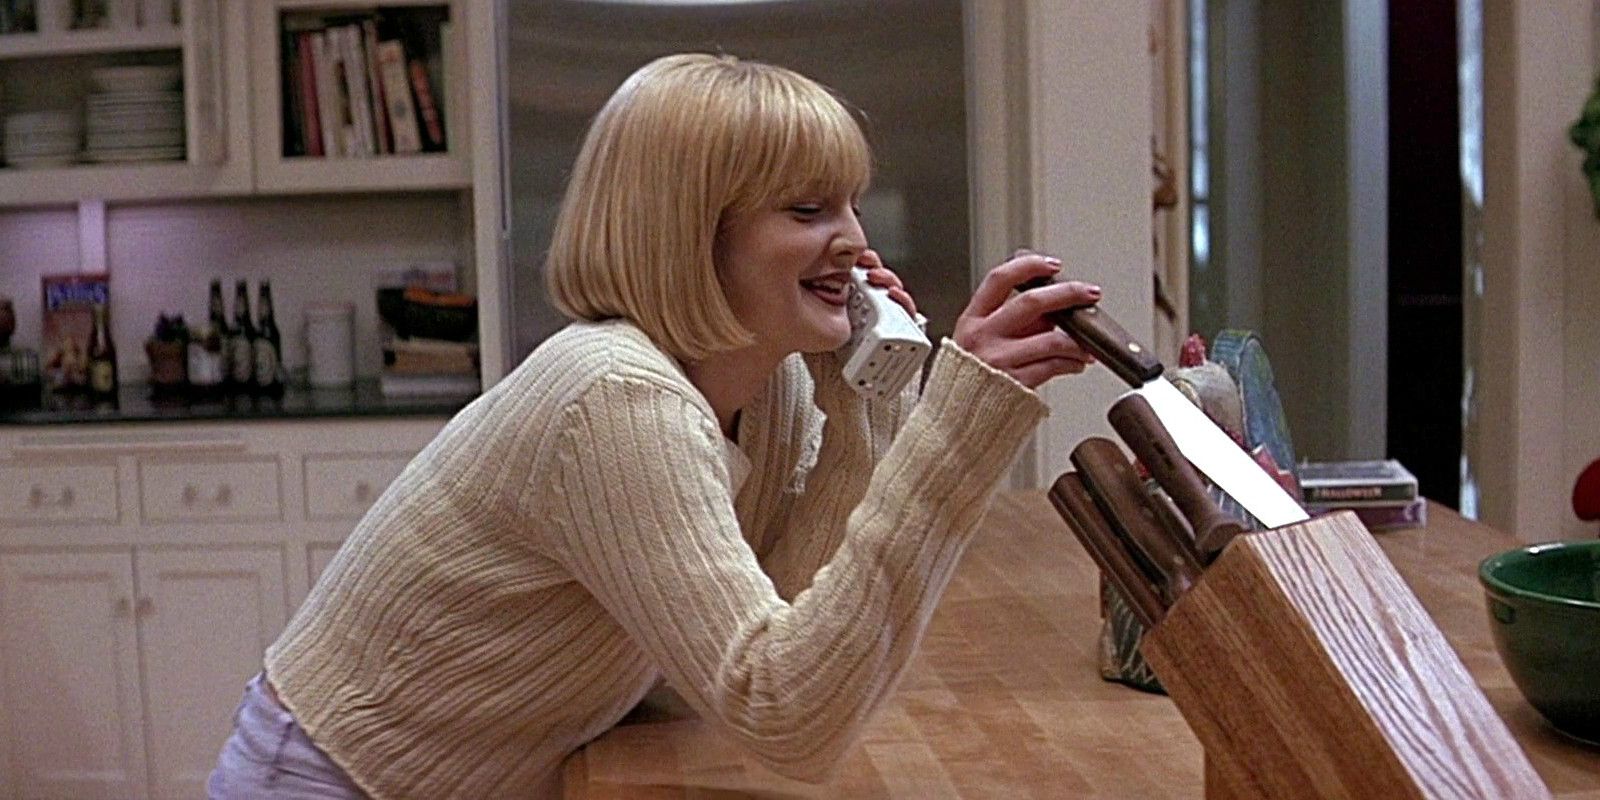 Casey talking on the phone in the opening scene of Scream